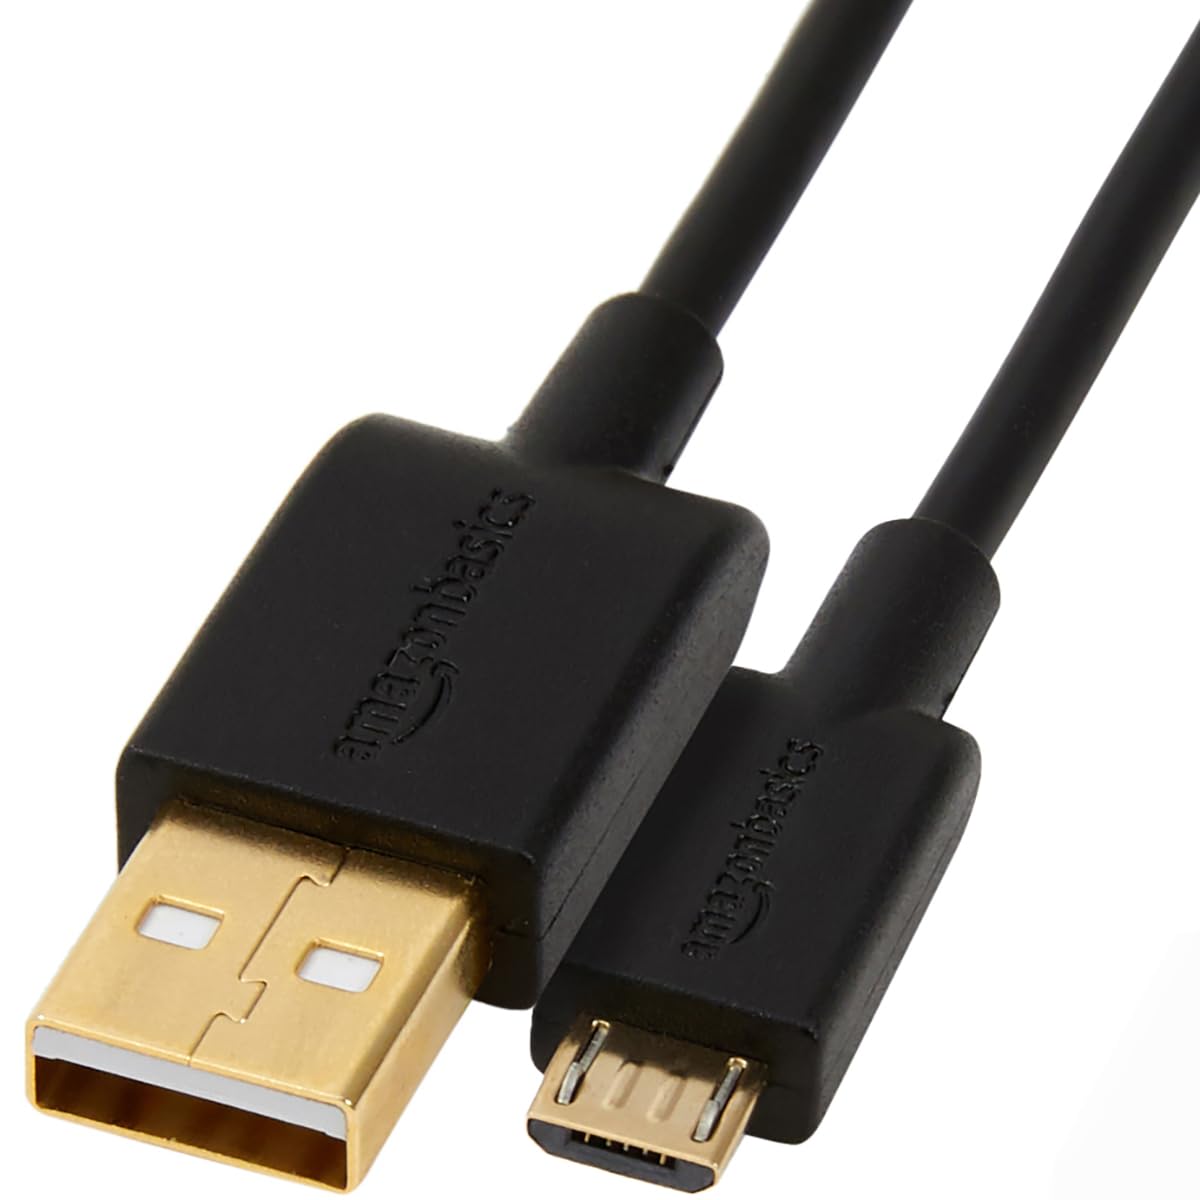 A charging cable plugged into a Chromecast device.